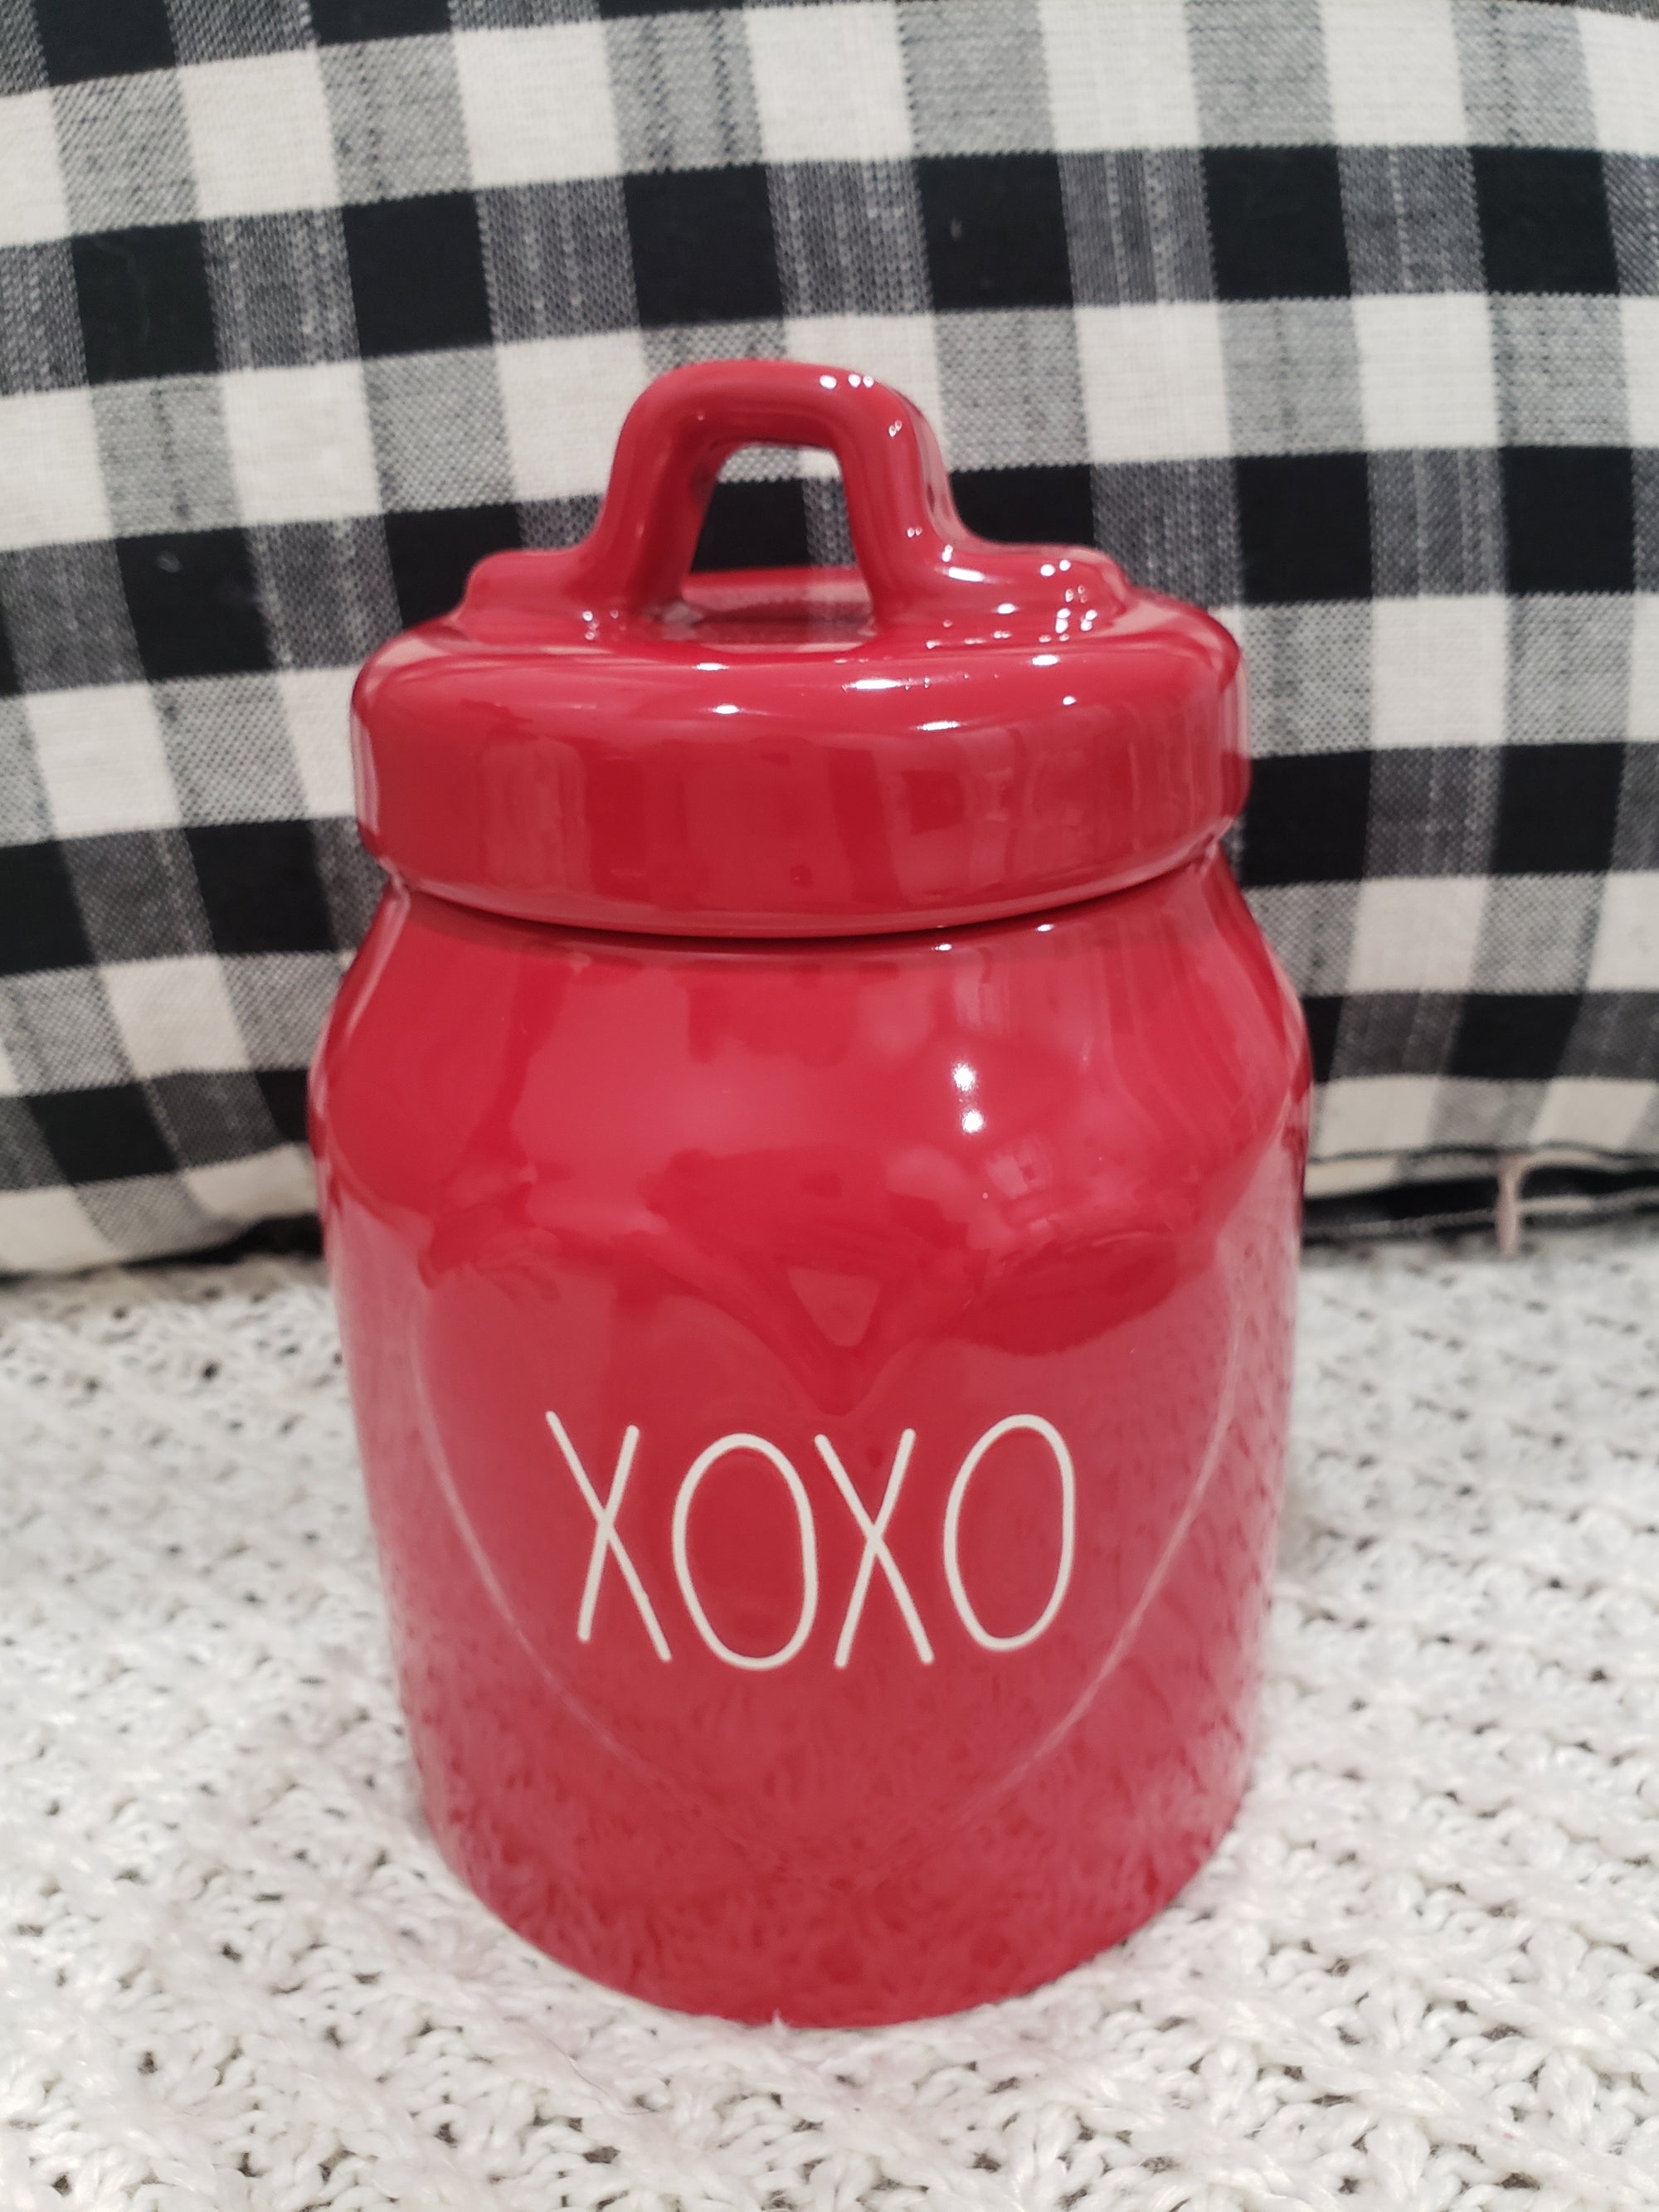 Rae Dunn "XOXO" Red Small Canister Collection